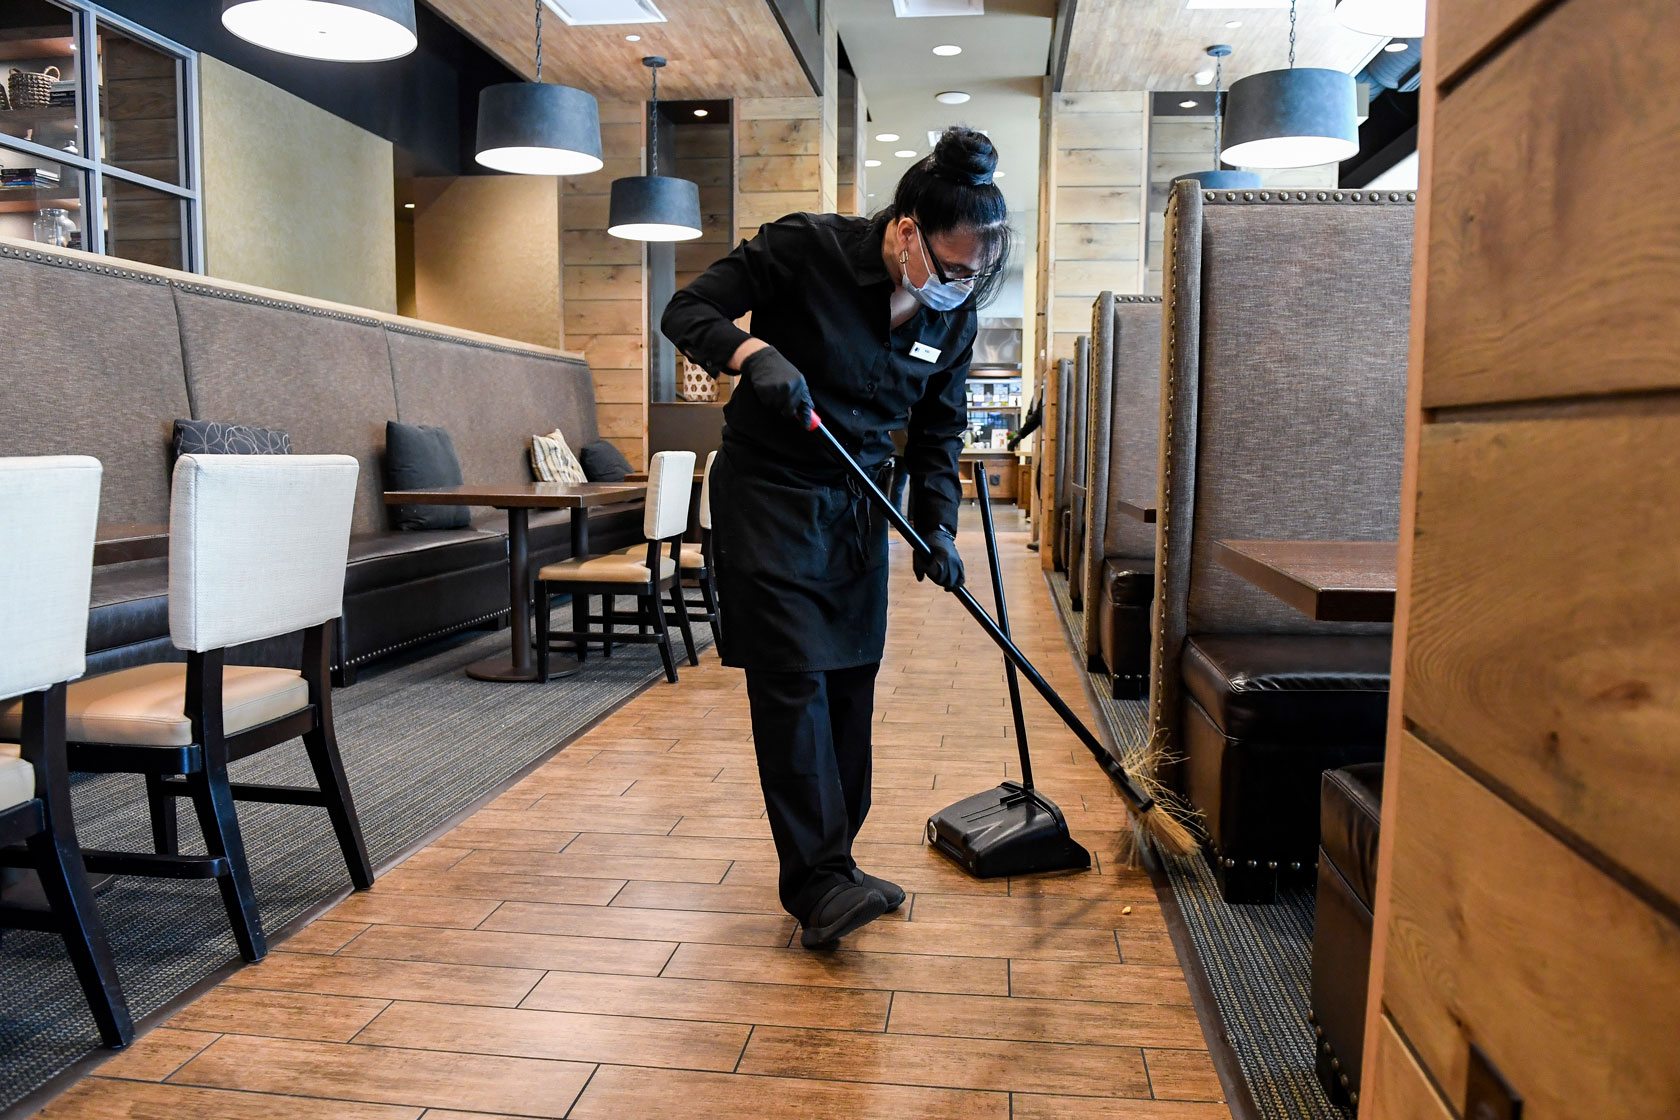 Photo shows a woman in a black uniform sweeping the floor under a booth table in a restaurant.